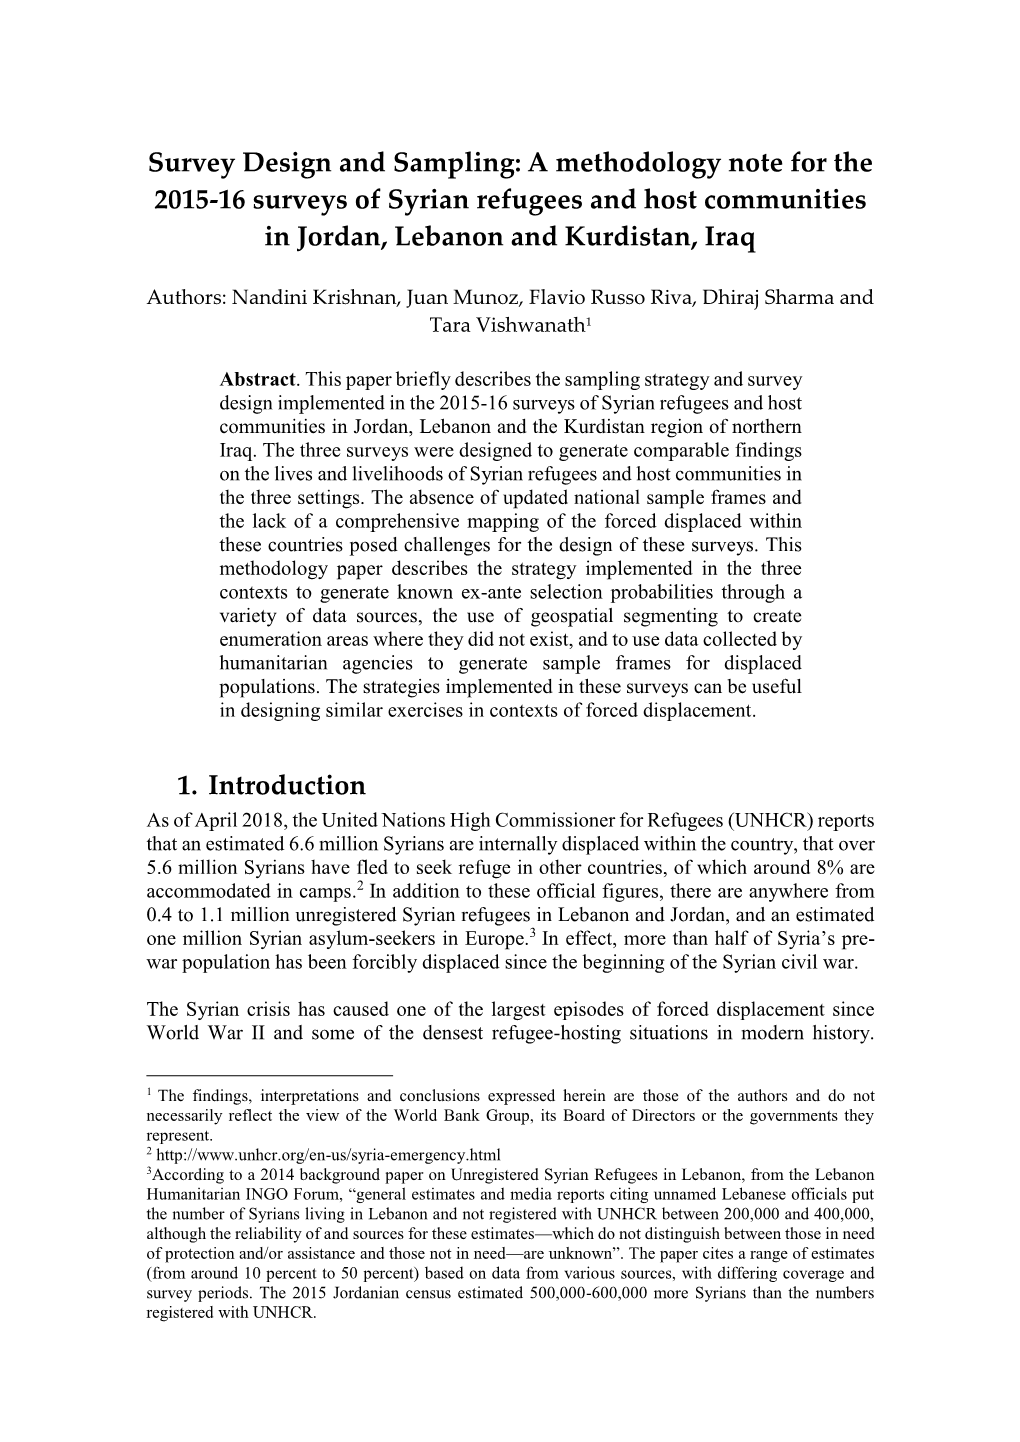 A Methodology Note for the 2015-16 Surveys of Syrian Refugees and Host Communities in Jordan, Lebanon and Kurdistan, Iraq